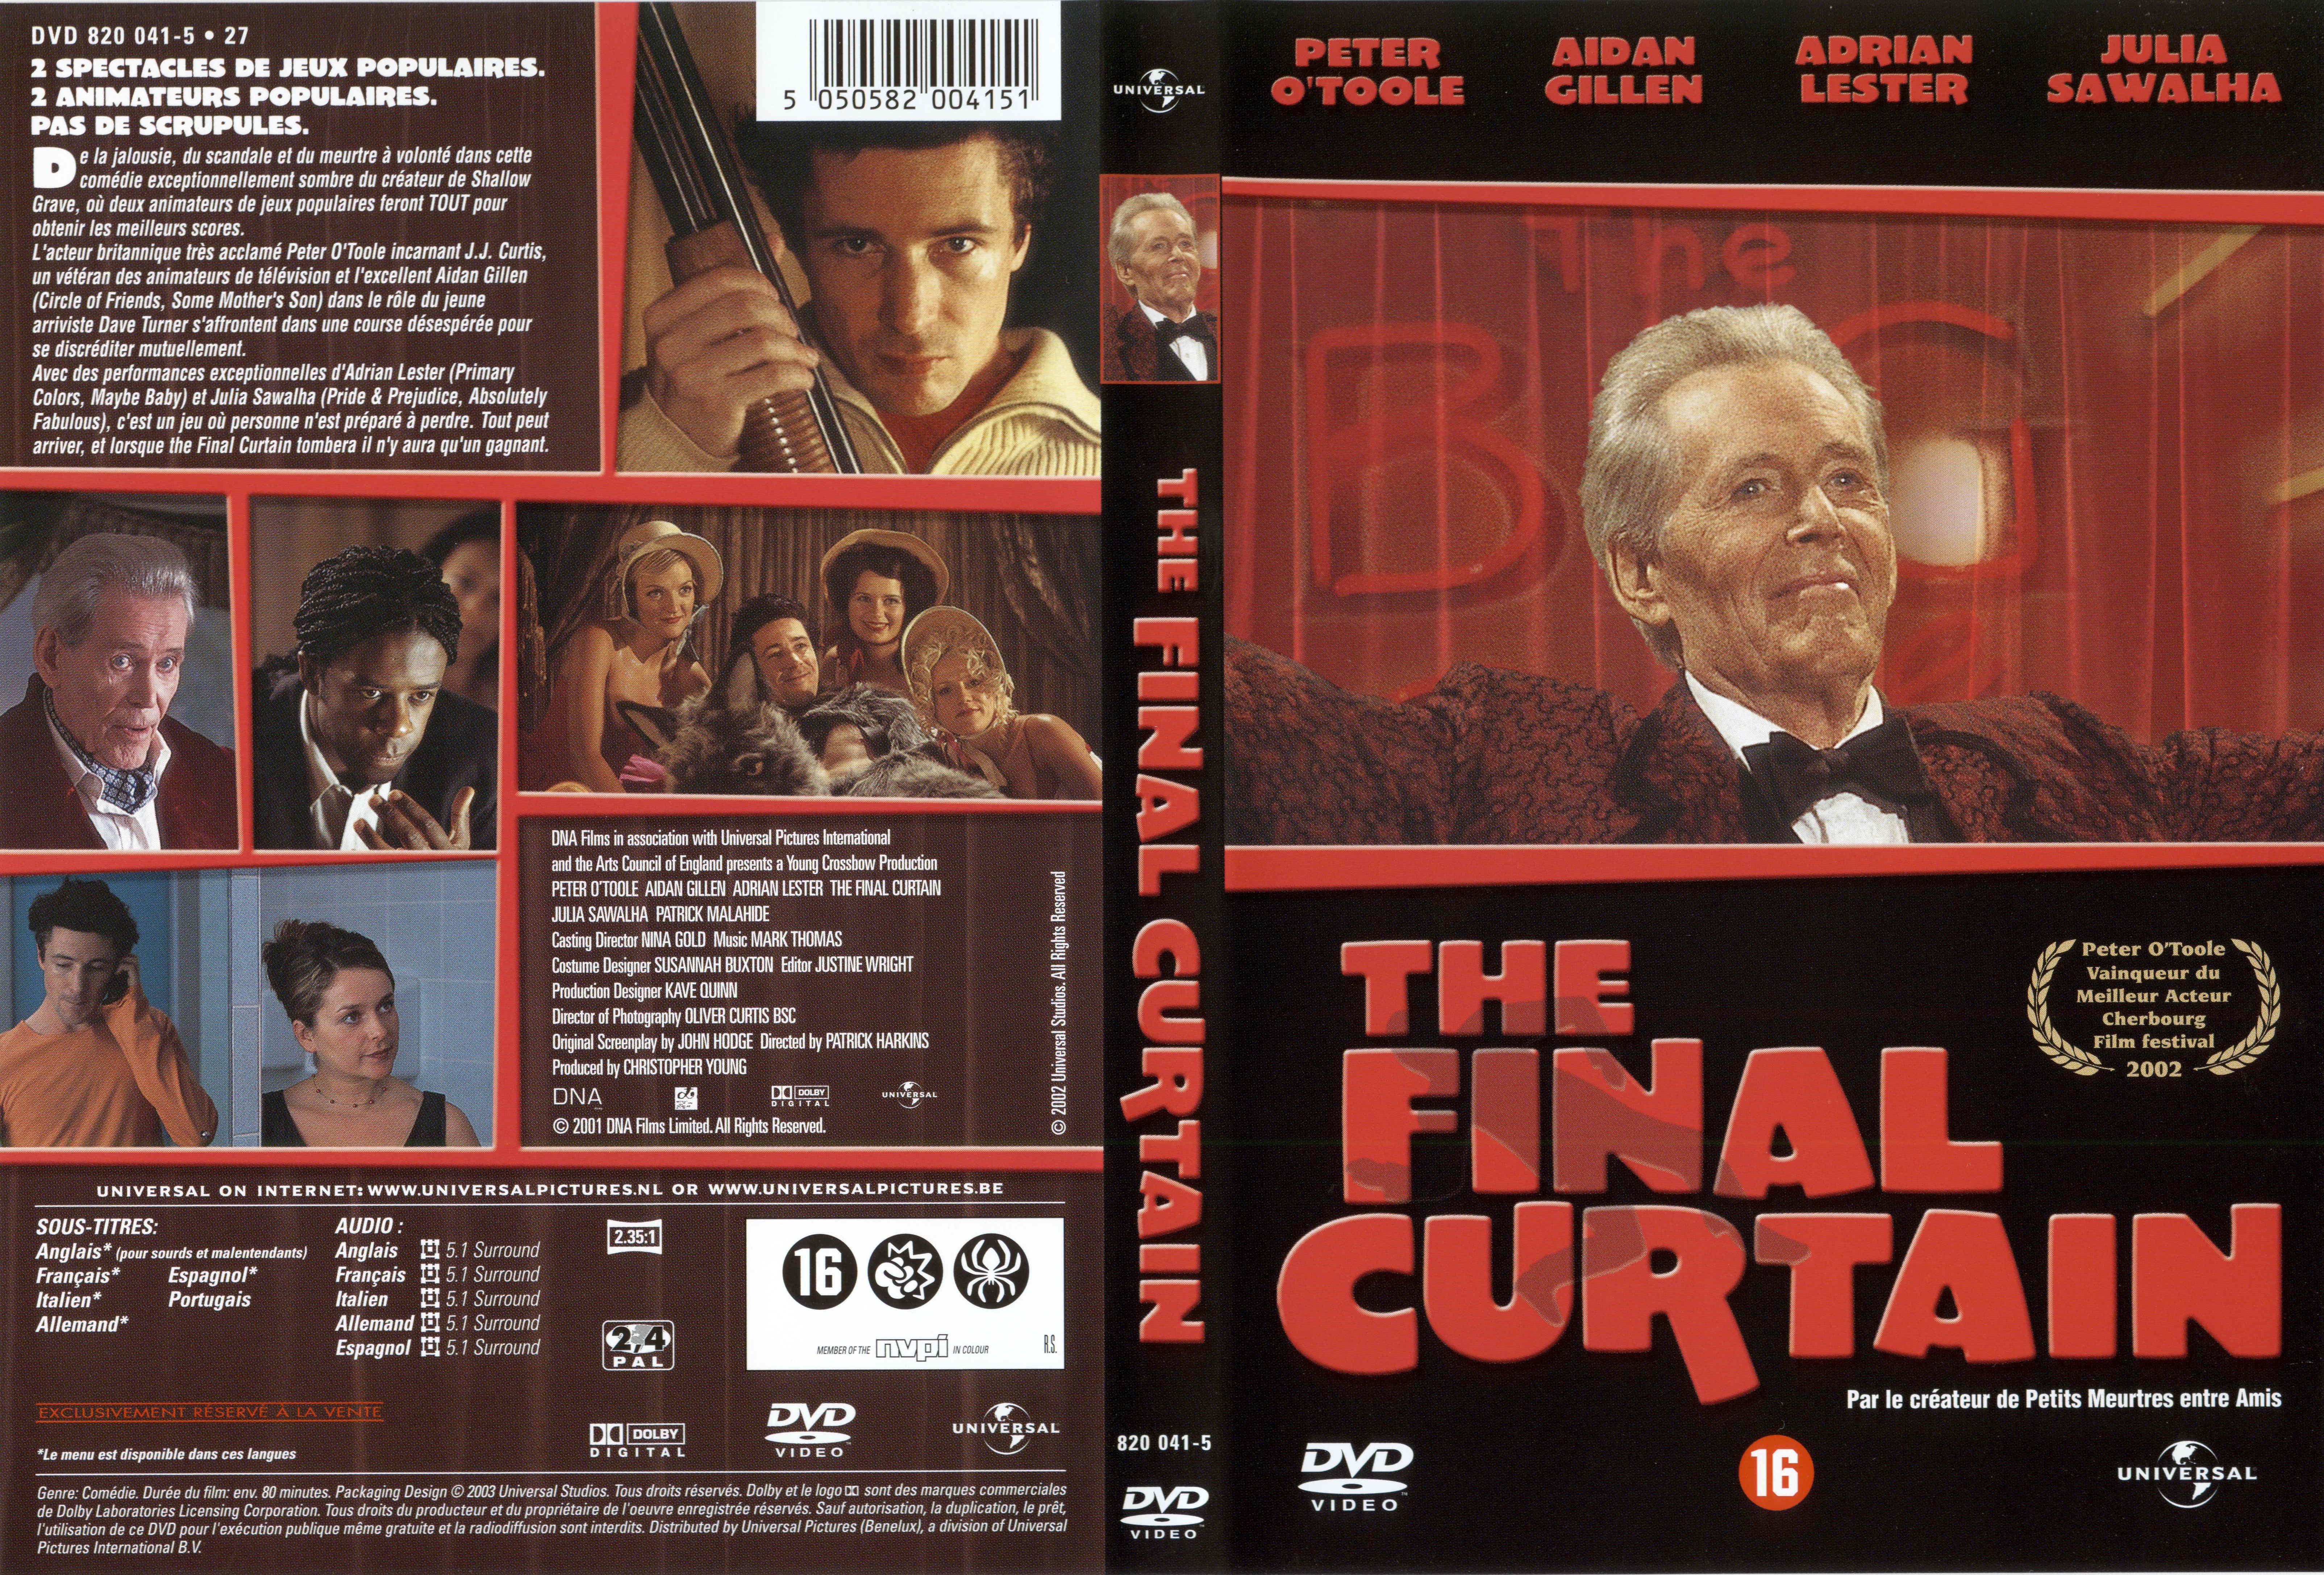 Jaquette DVD The final curtain